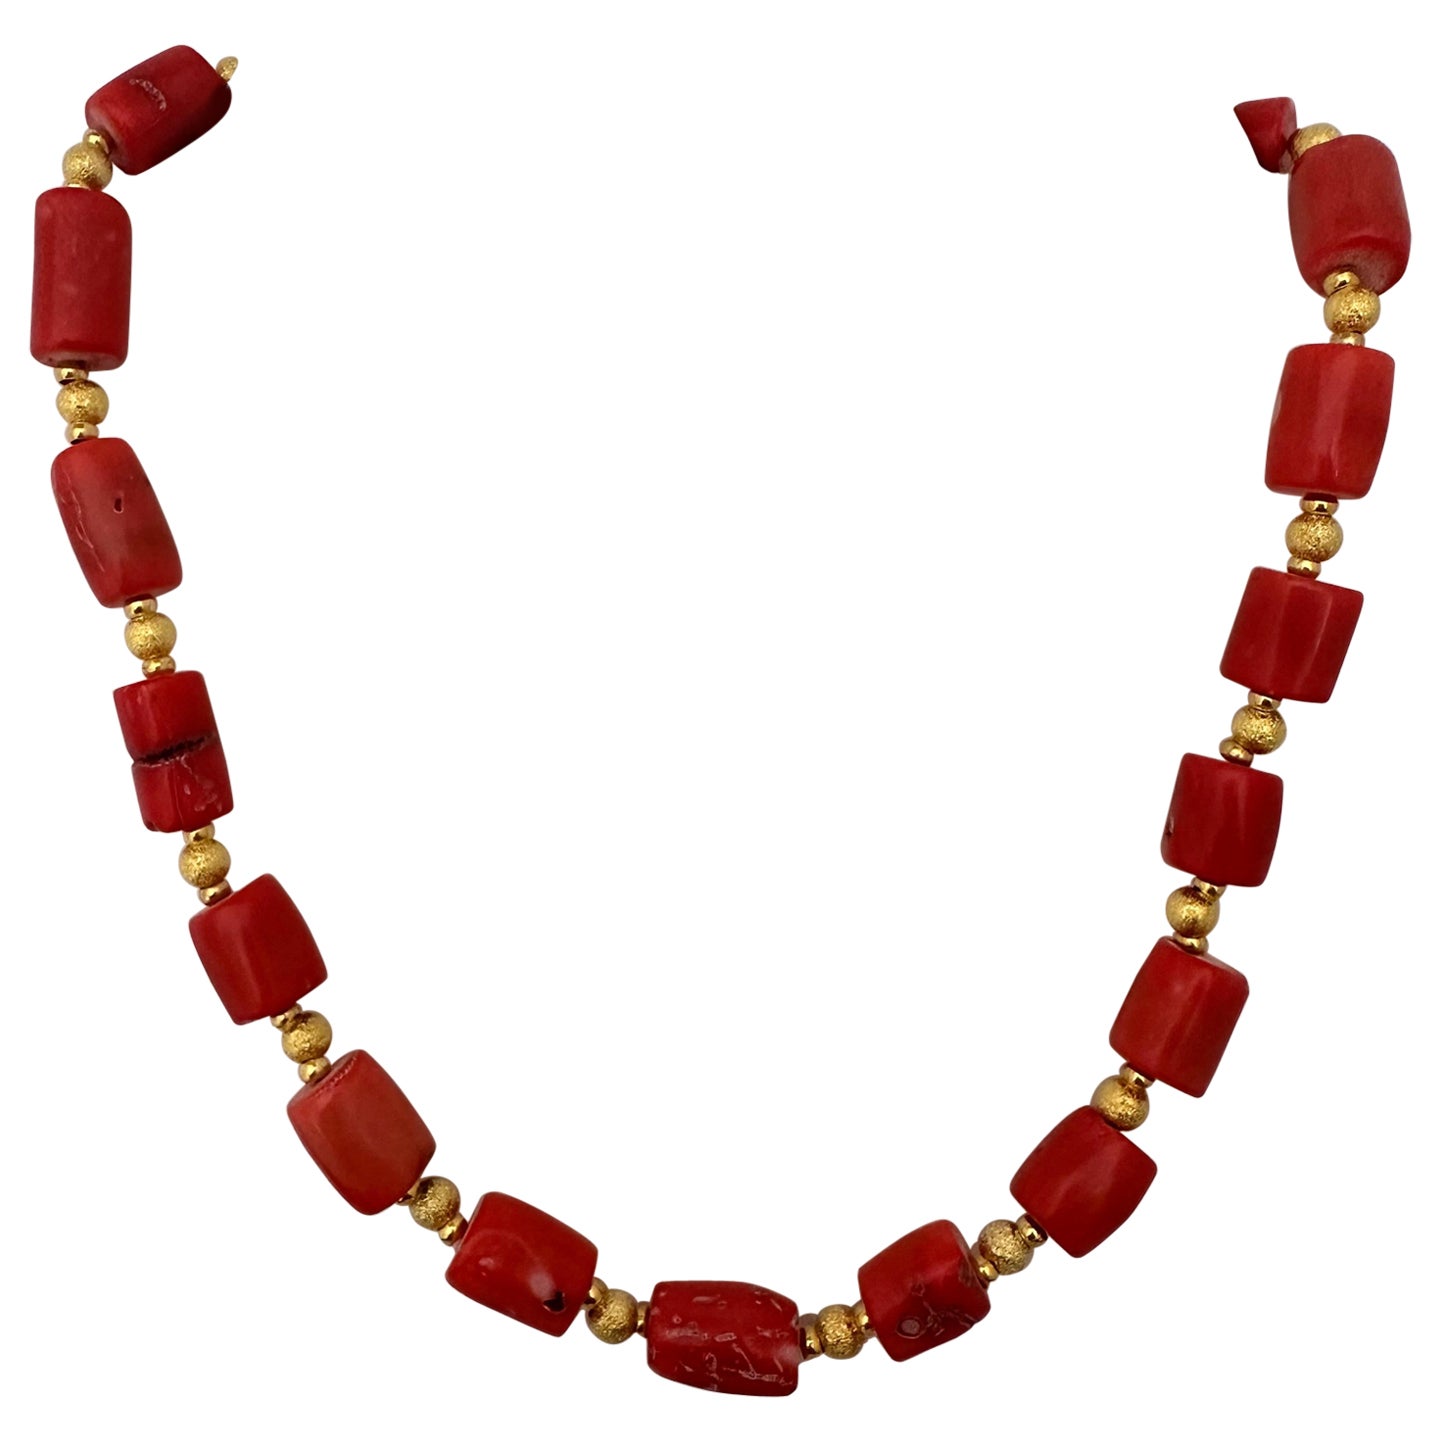 Handmade ~ Gold Beads & Salmon Barrel Shape Coral Beaded 22" Necklace #C47 For Sale